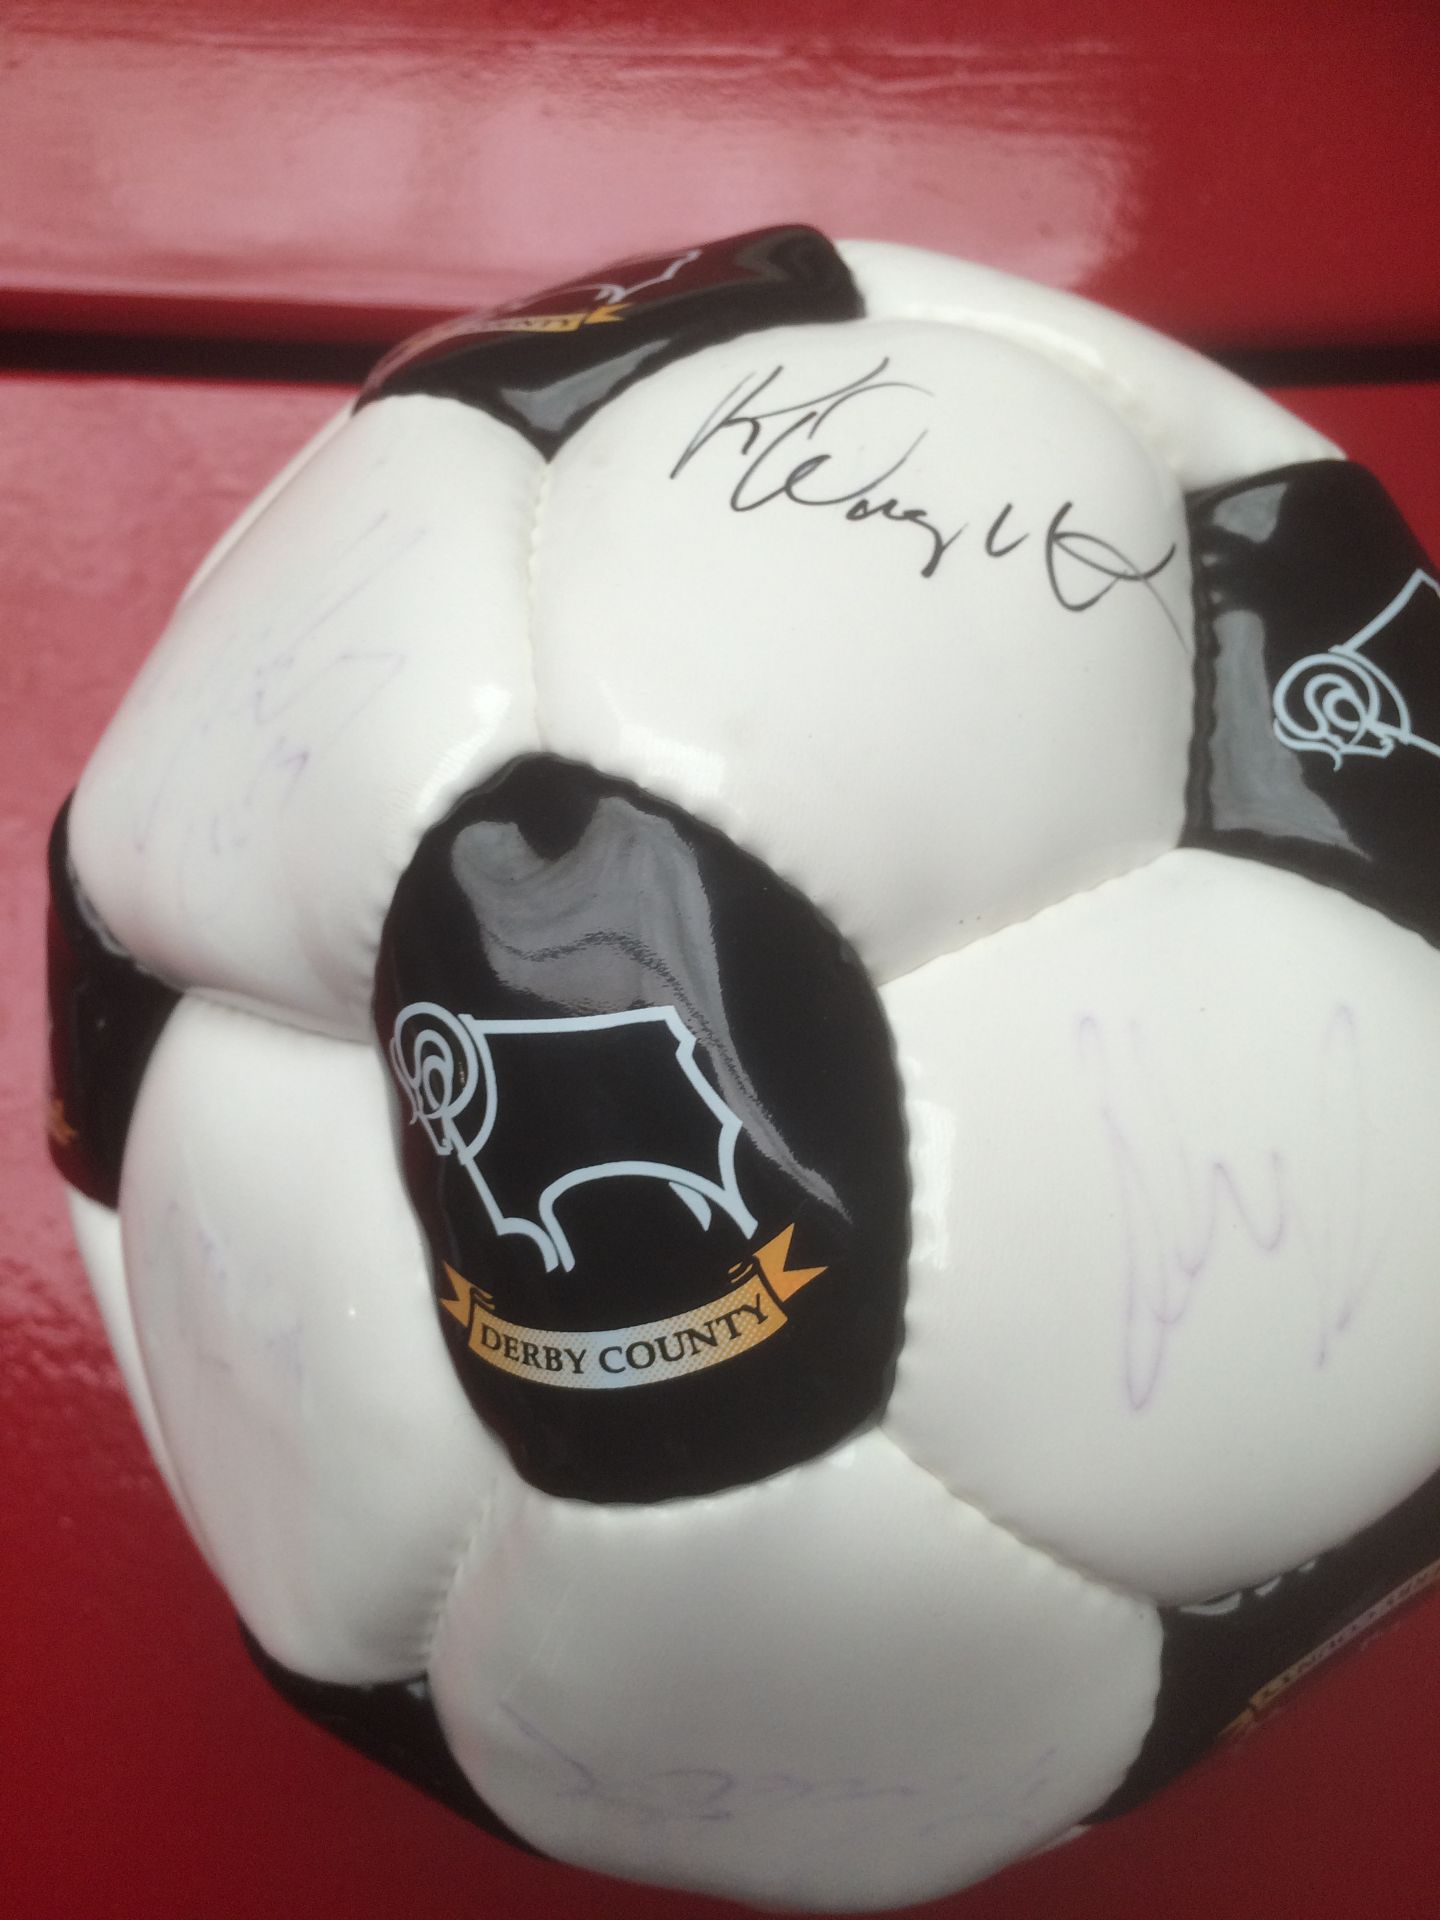 genuine signed Derby County football - Image 2 of 3